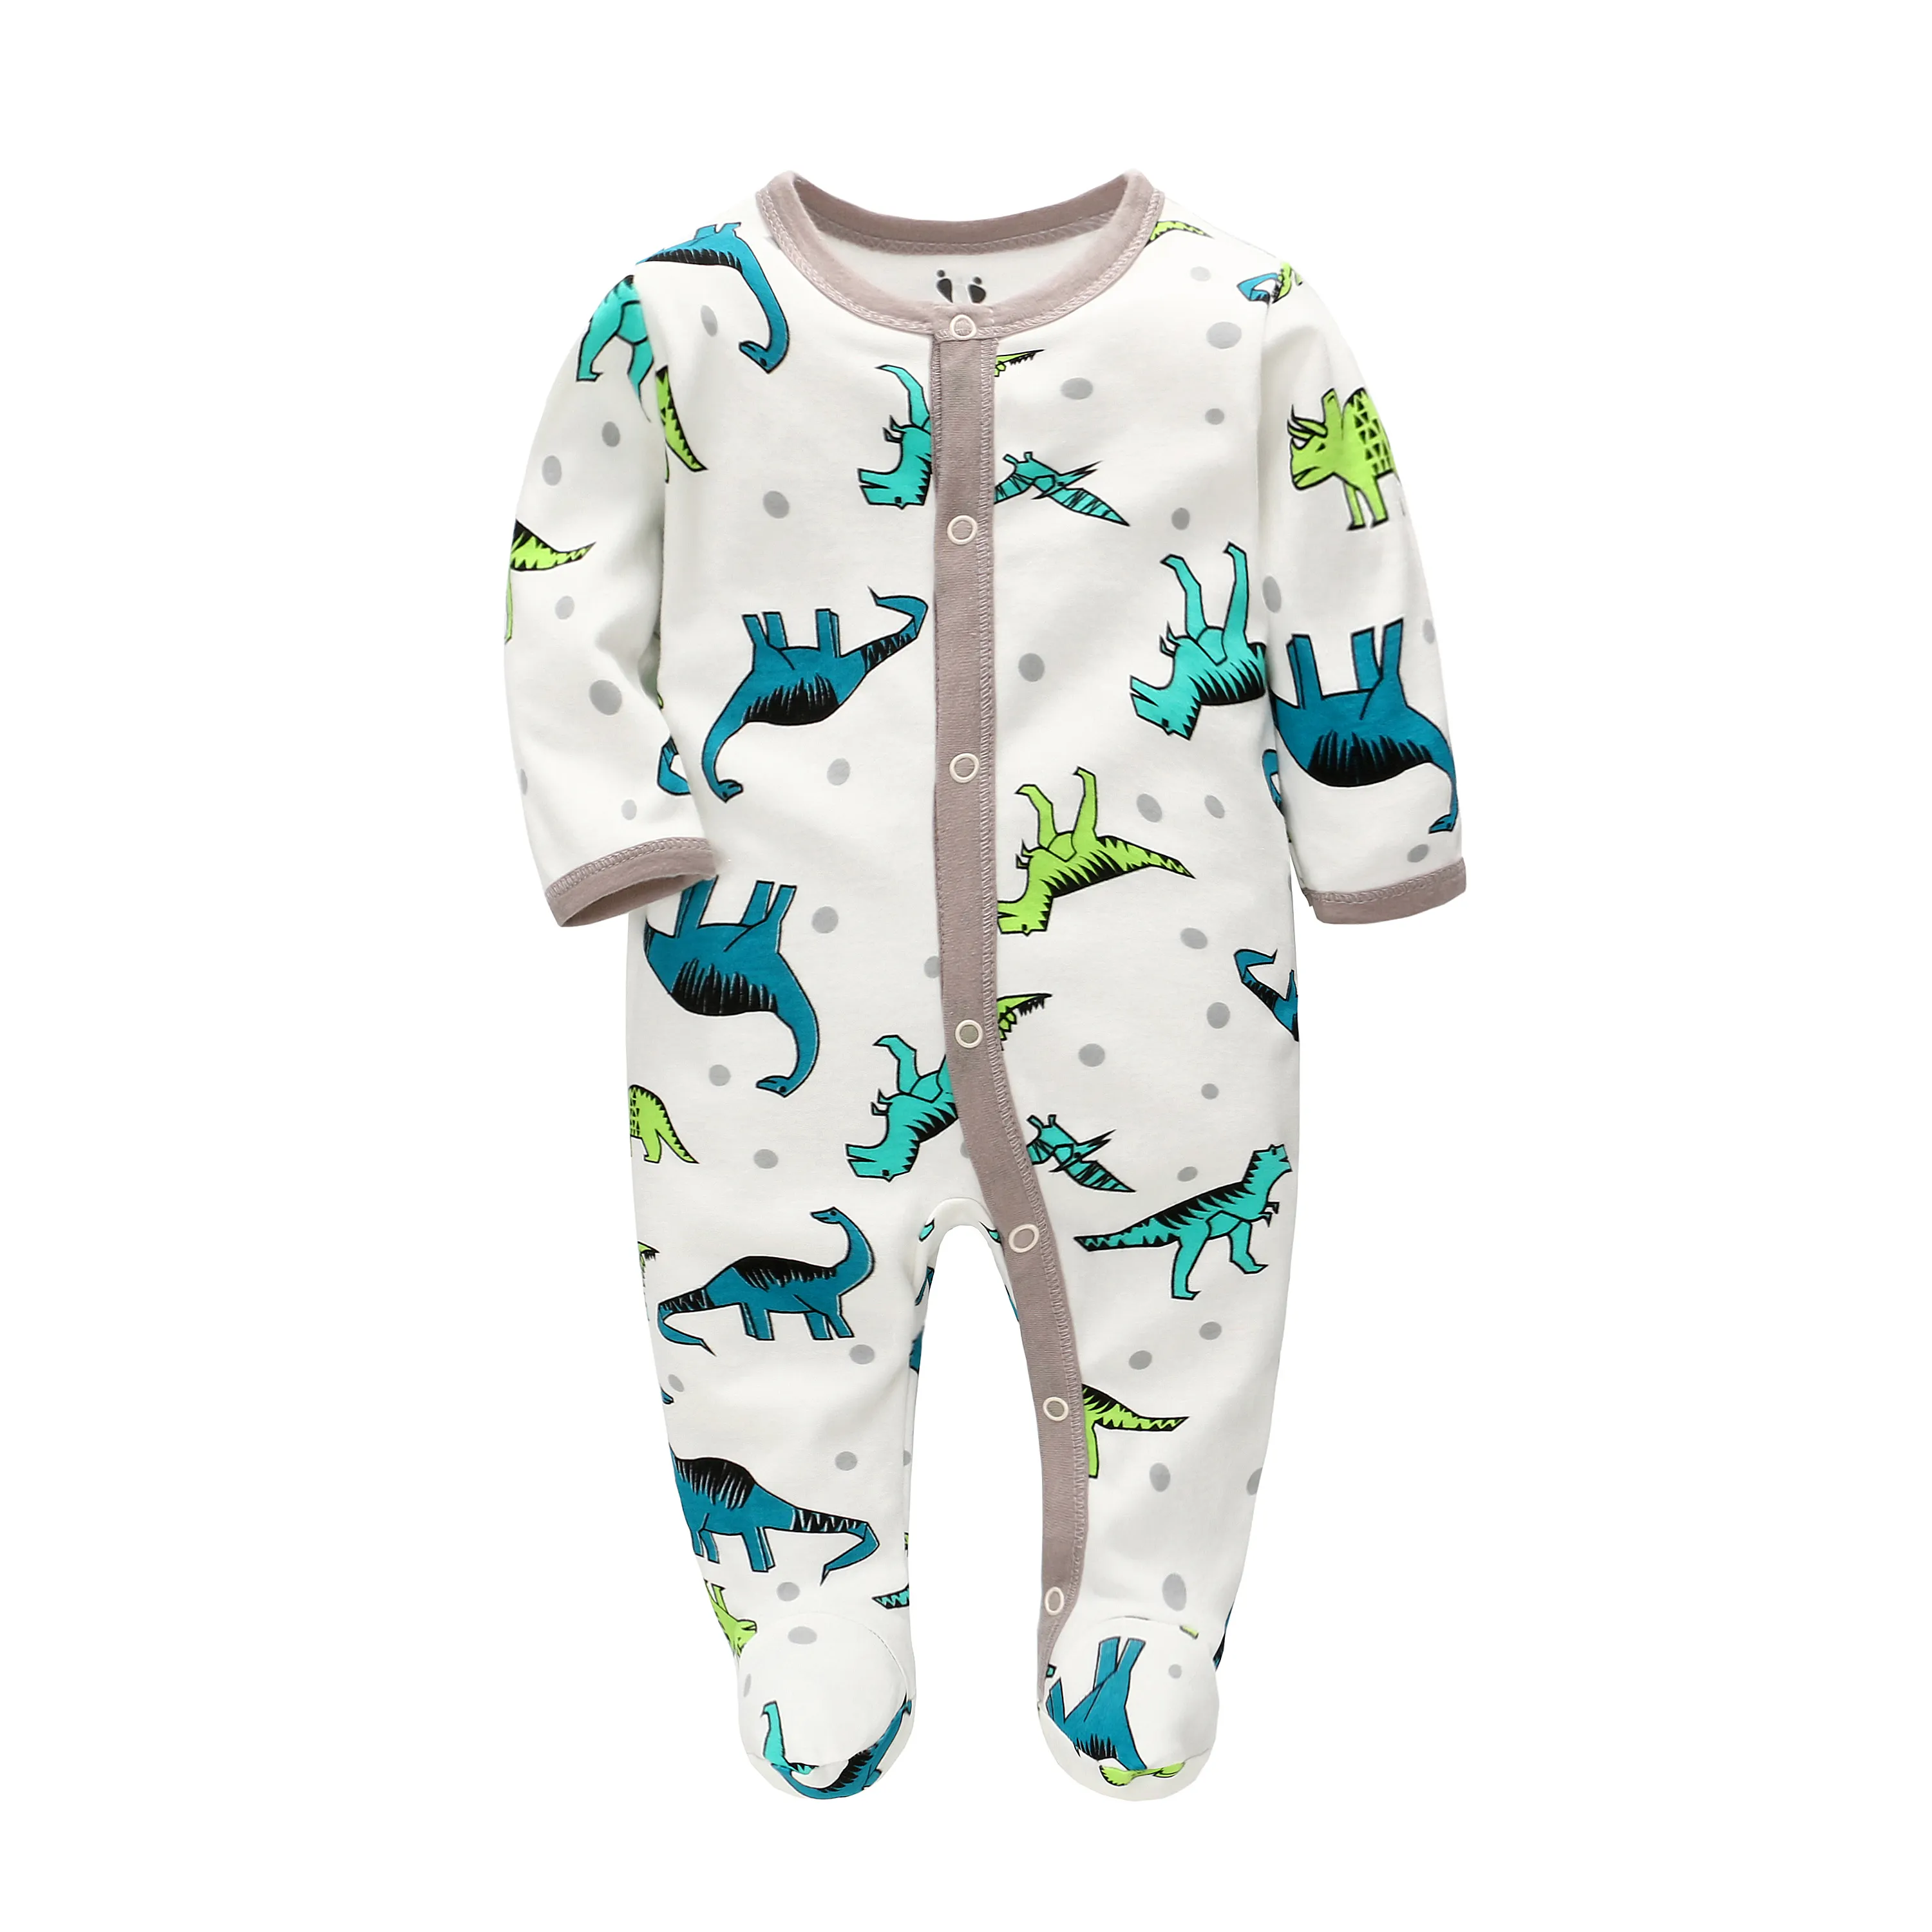 Super-Soft Cotton Jersey Printed Baby Rompers Four Season baby clothes In Stock baby jumpsuit Toddler Cotton Pajamas for Kids